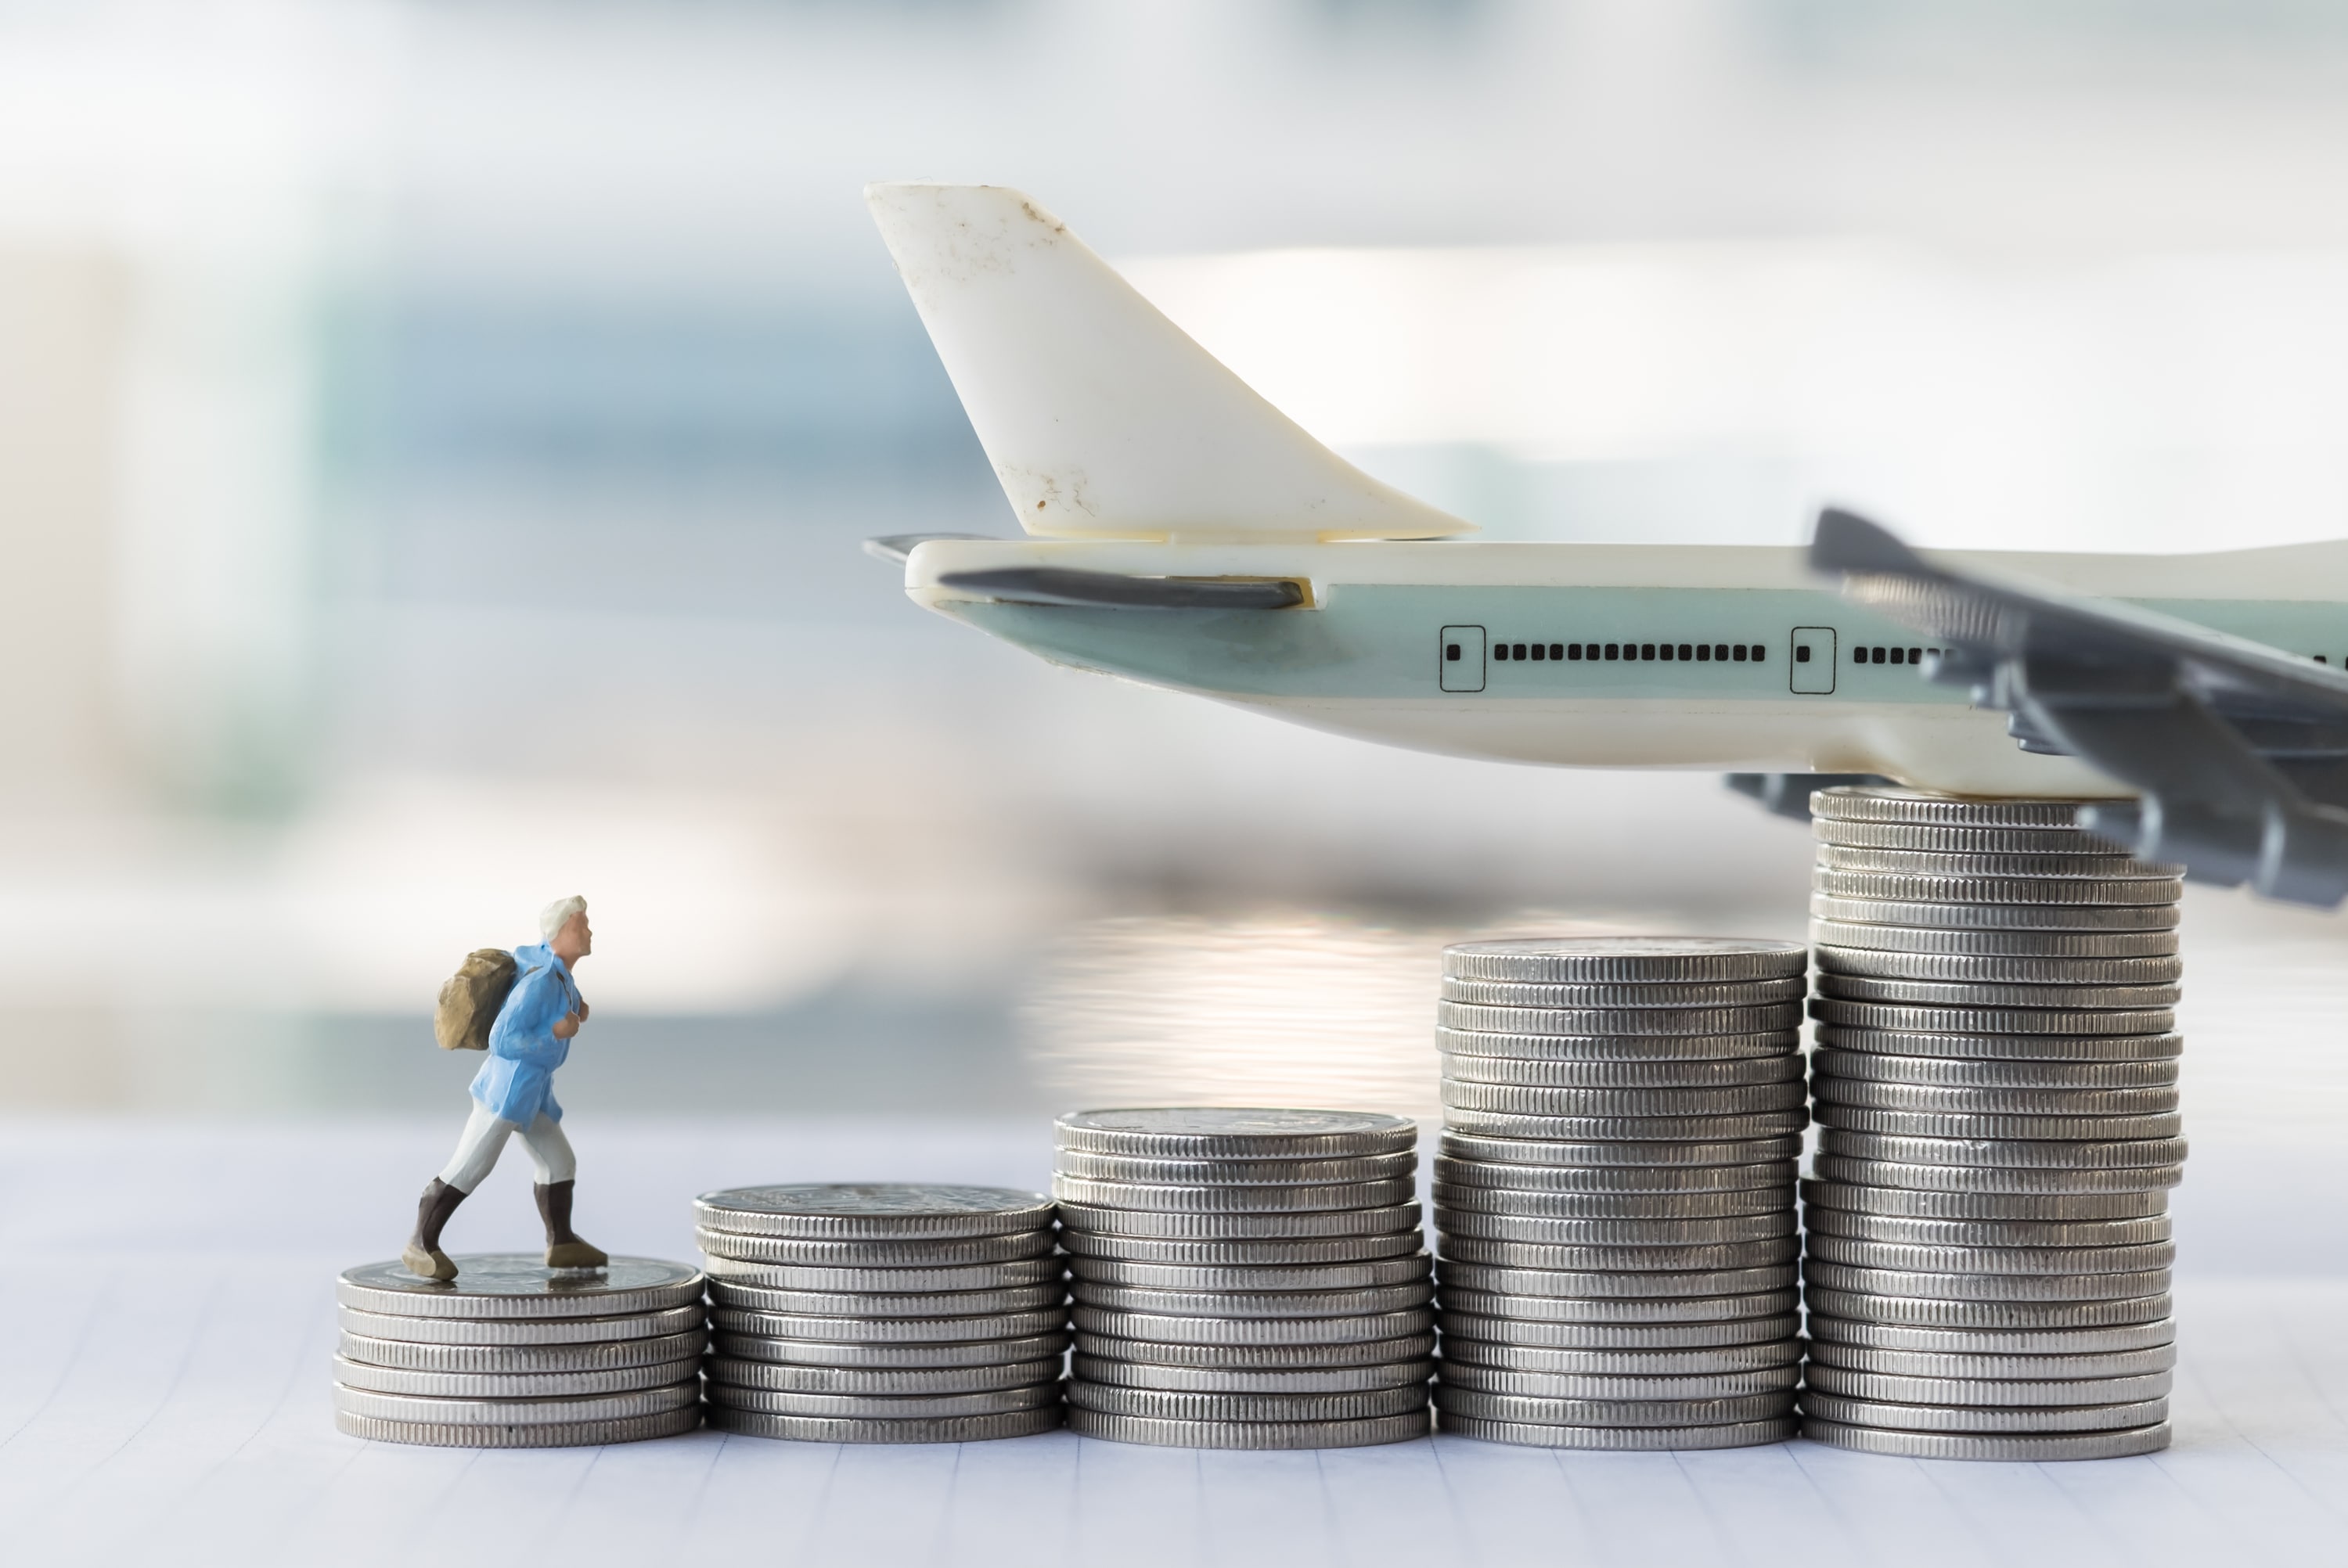 Cheap Airlines: Your Guide to Saving Money on Travel